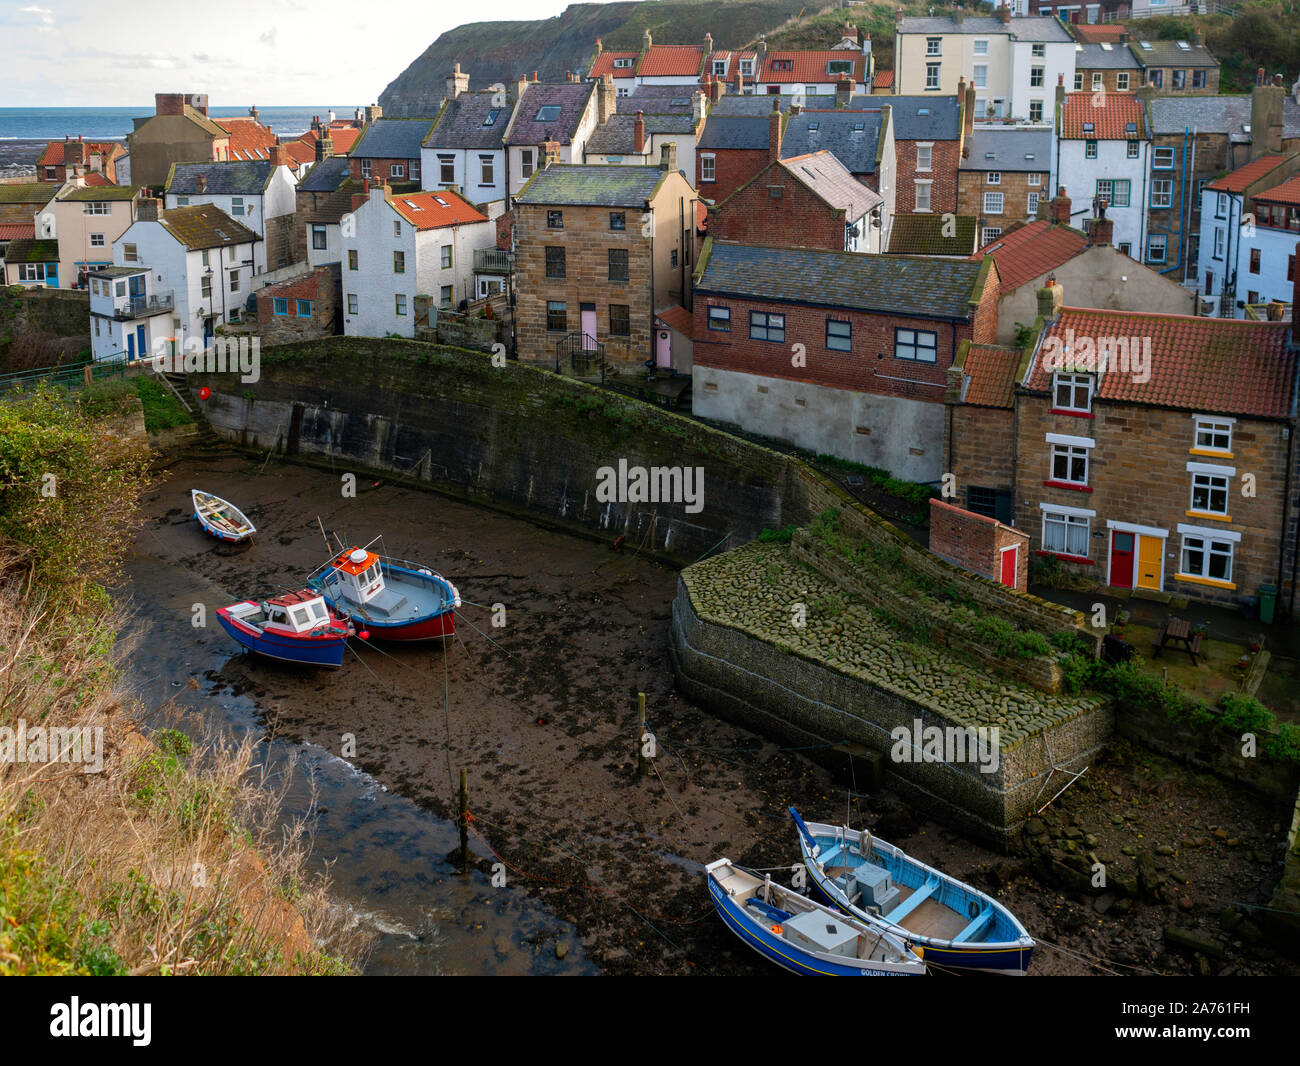 The view looking over Roxby Beck from Cowbar towards the North Yorkshire Village of Staithes Stock Photo